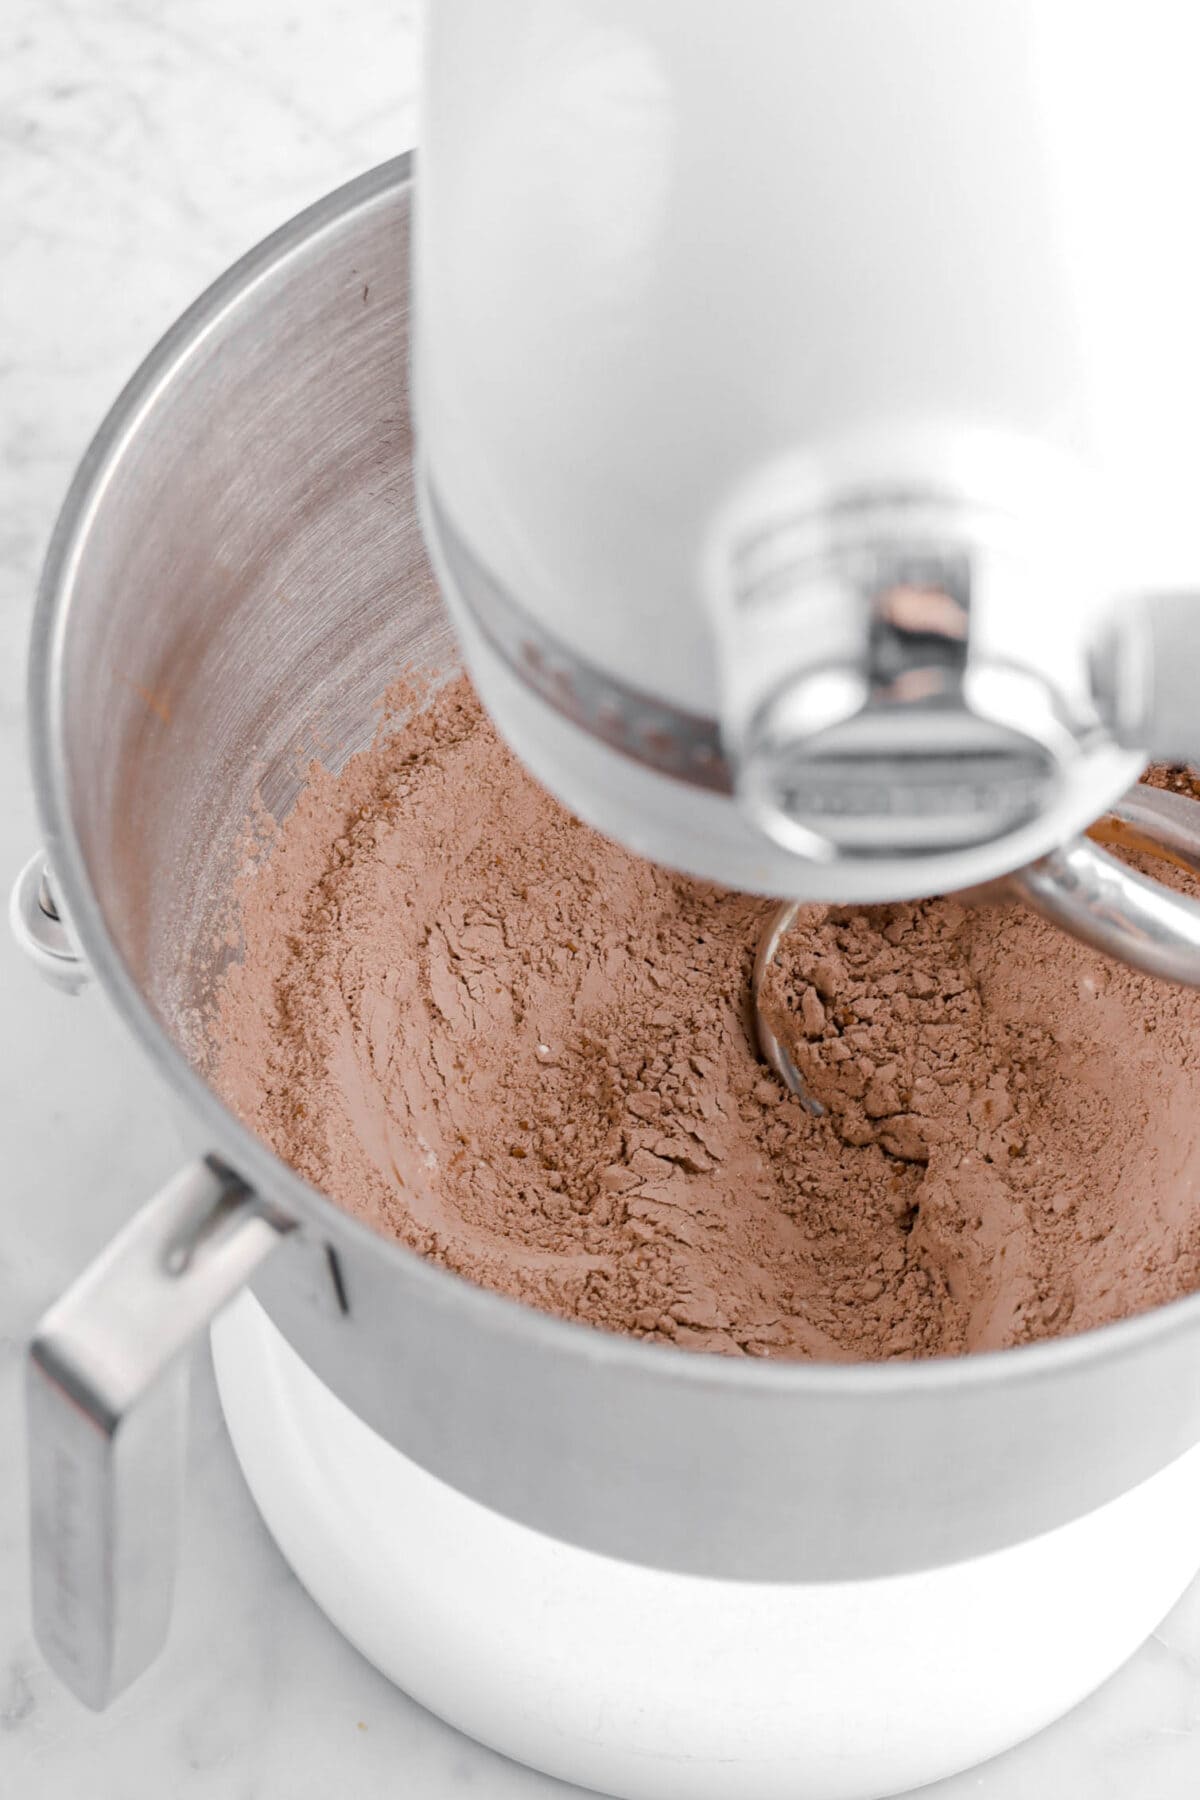 dry ingredients mixed in a stand mixer.